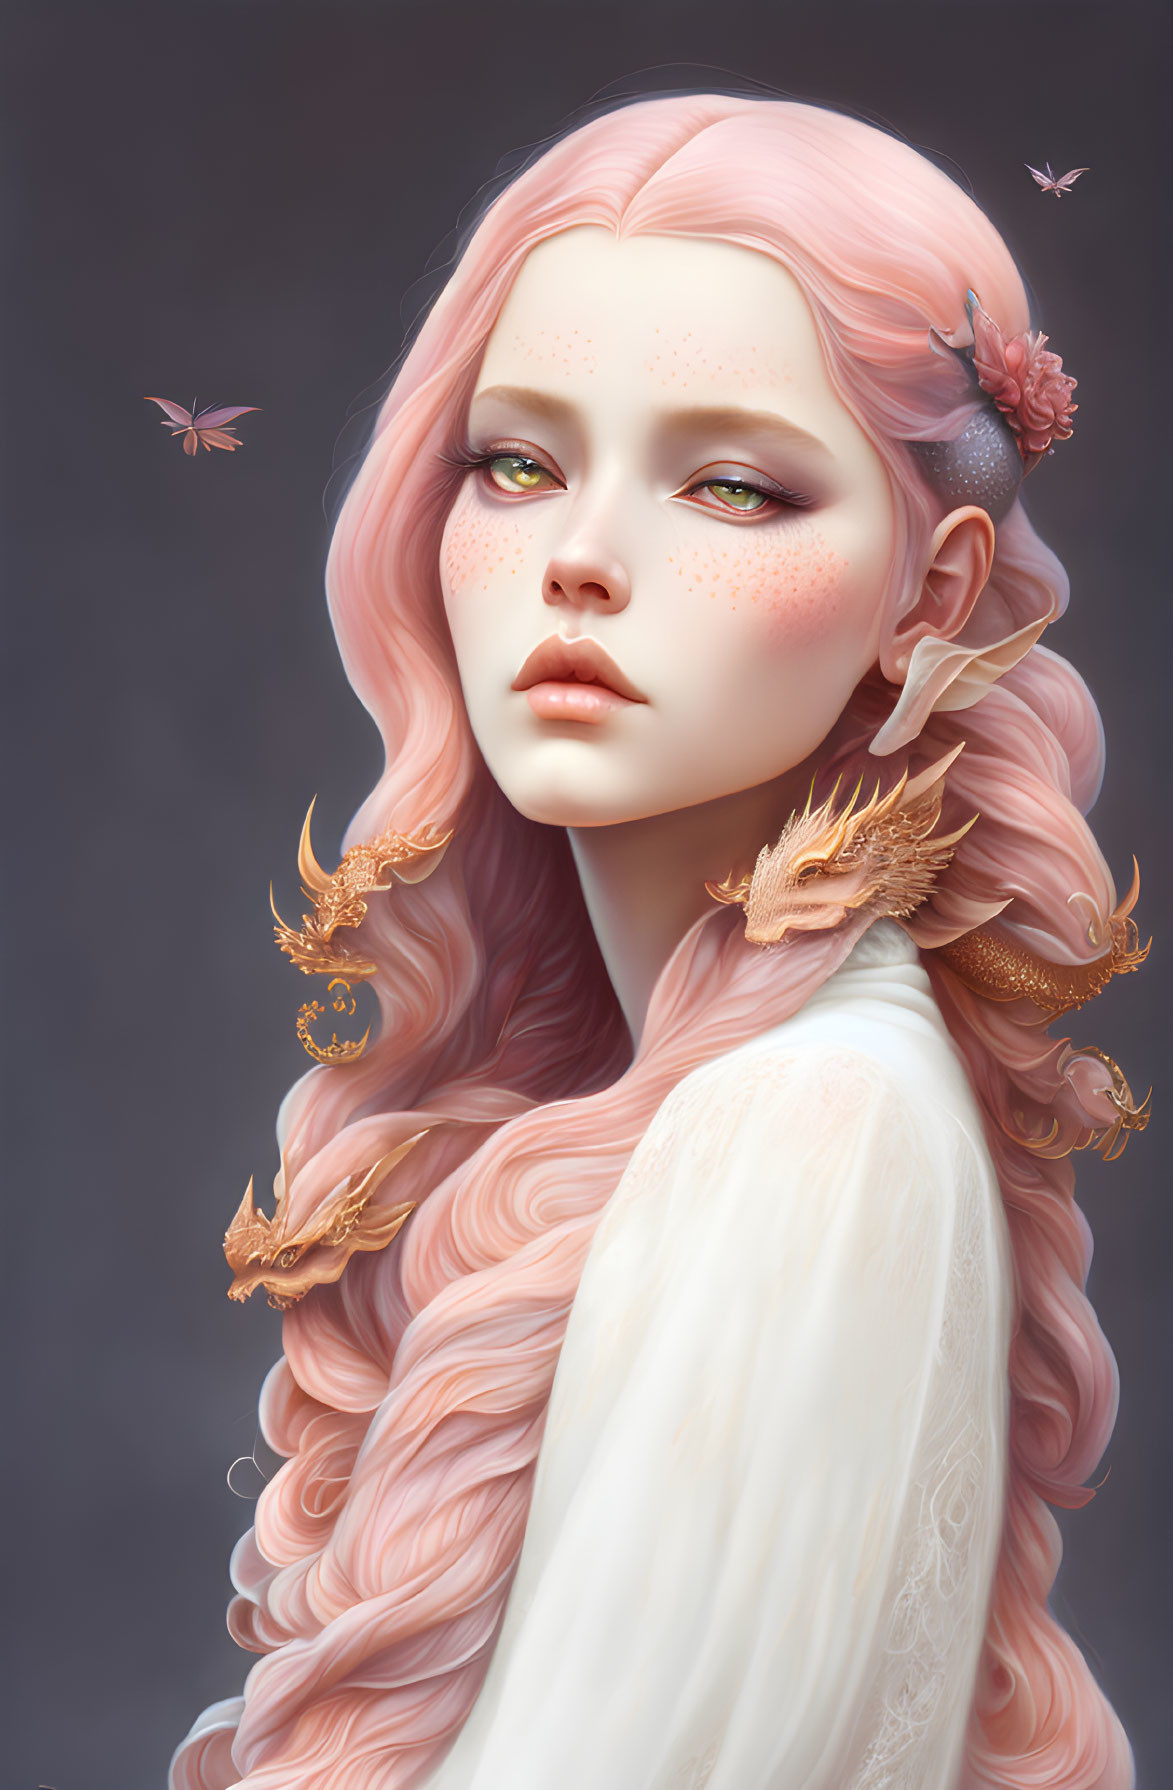 Digital artwork: Woman with pink hair, freckled skin, gold dragon ornaments, and flying creatures